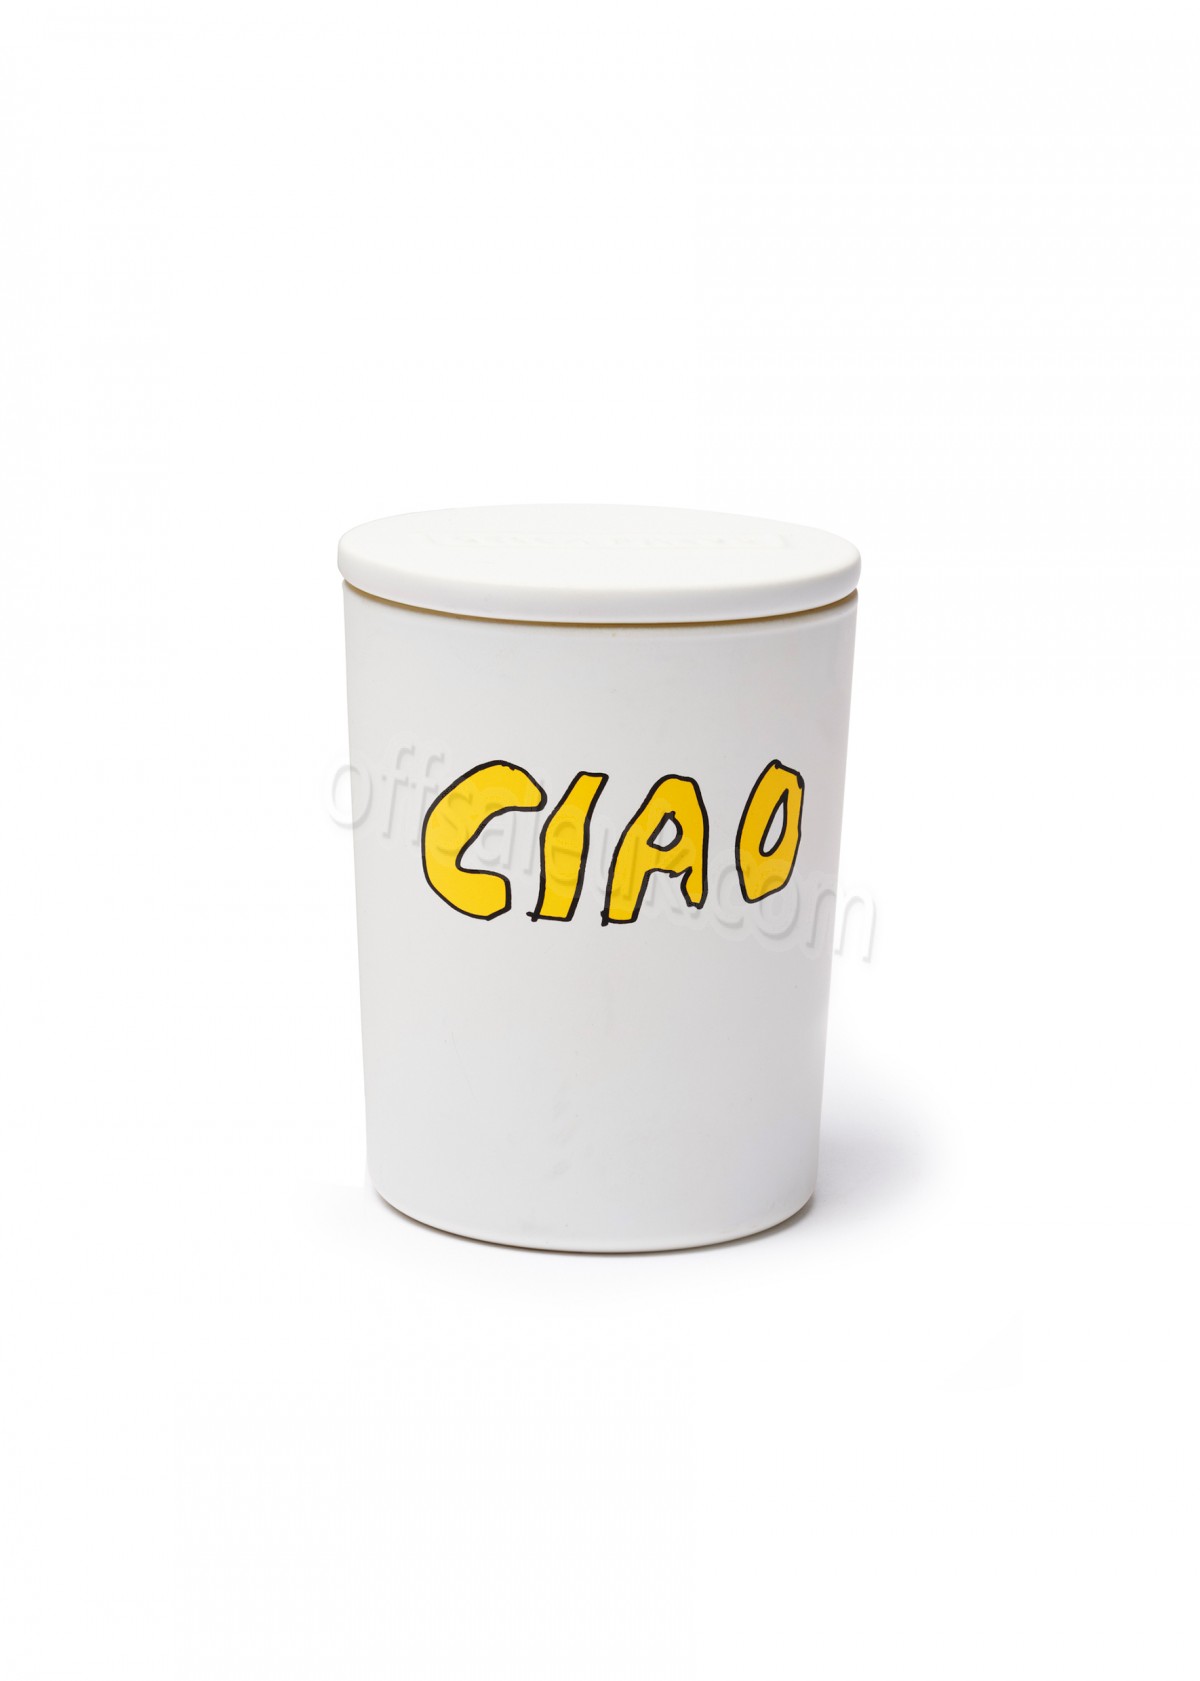 Cheap Ciao Candle - -2